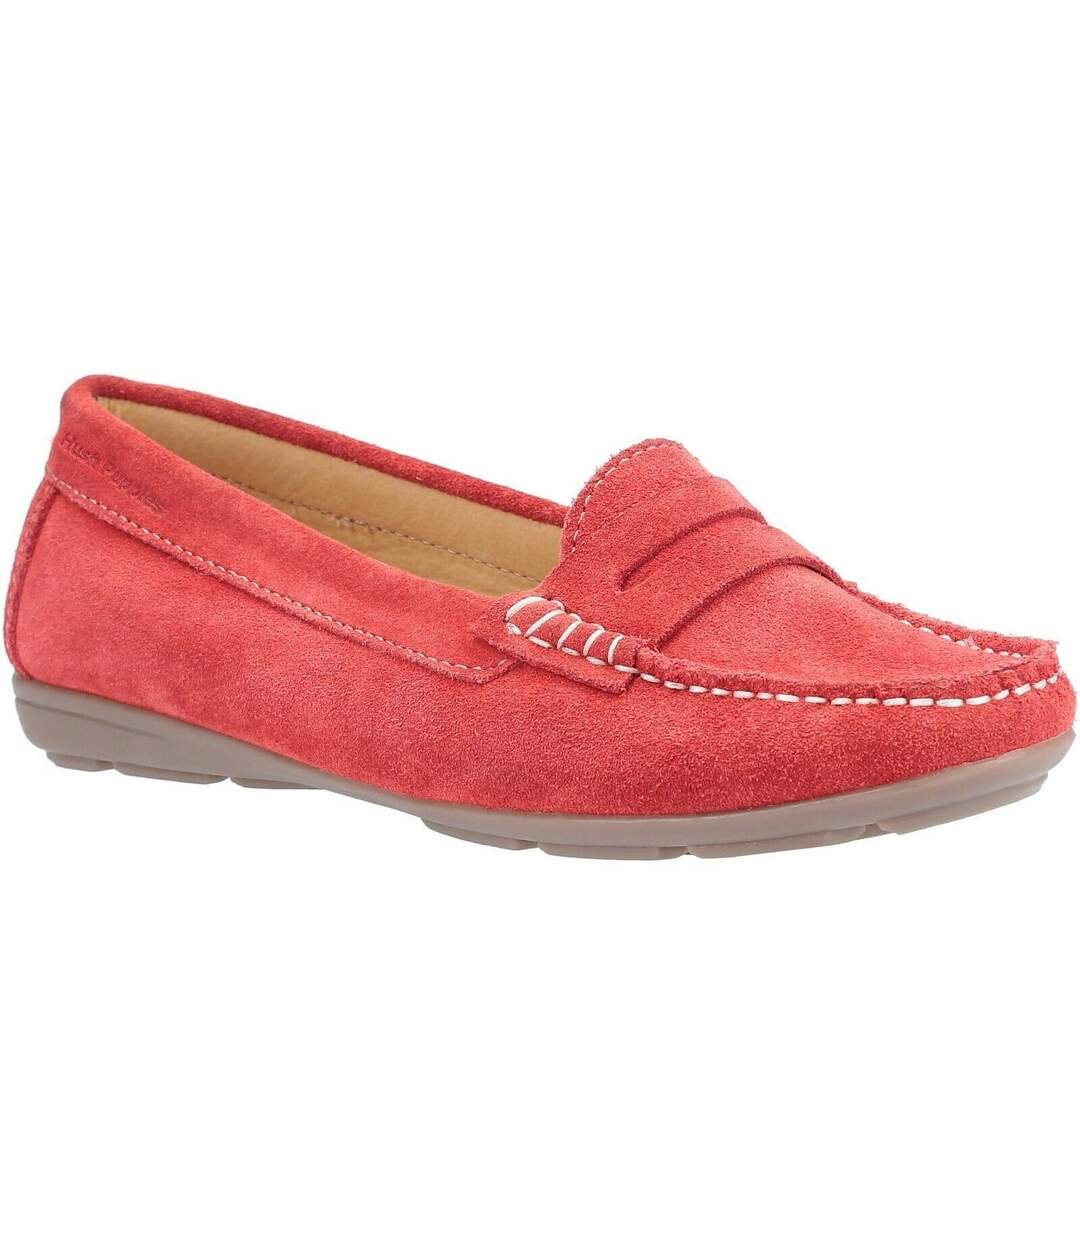 Hush Puppies Womens/Ladies Margot Suede Leather Loafer Shoe (Red) - UTFS7020